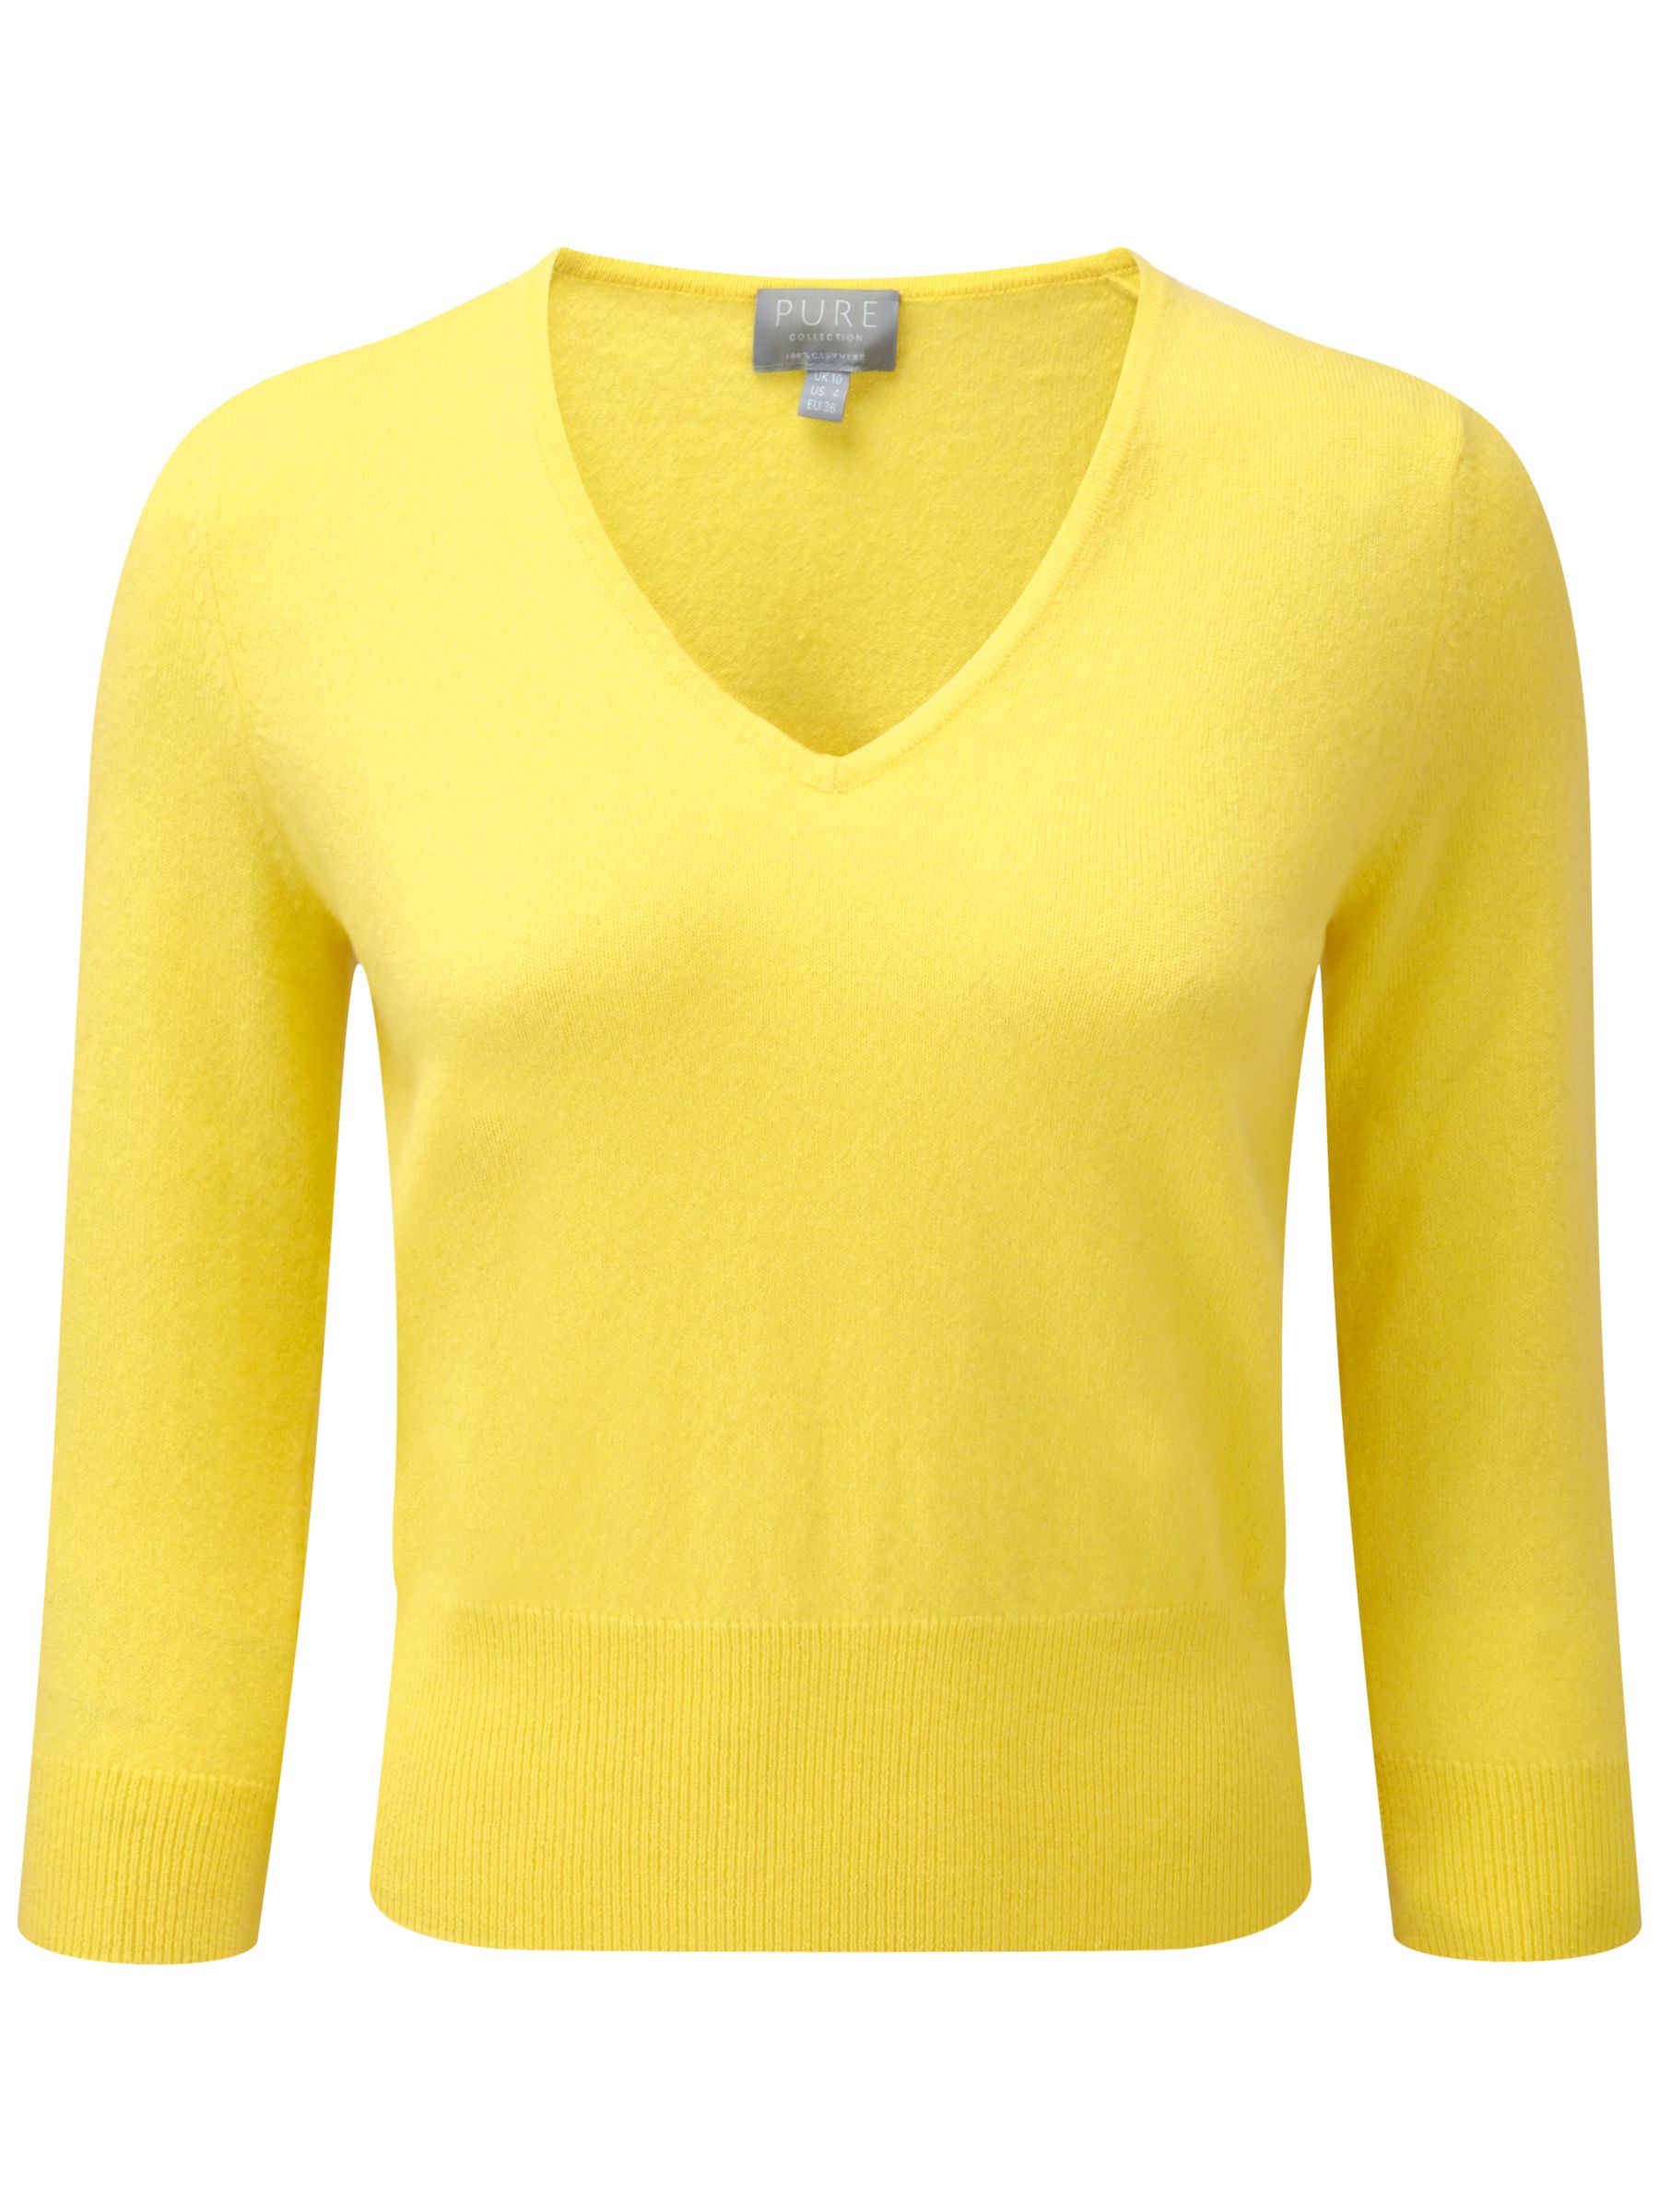 Buy Pure Collection Cropped Cashmere Jumper | John Lewis